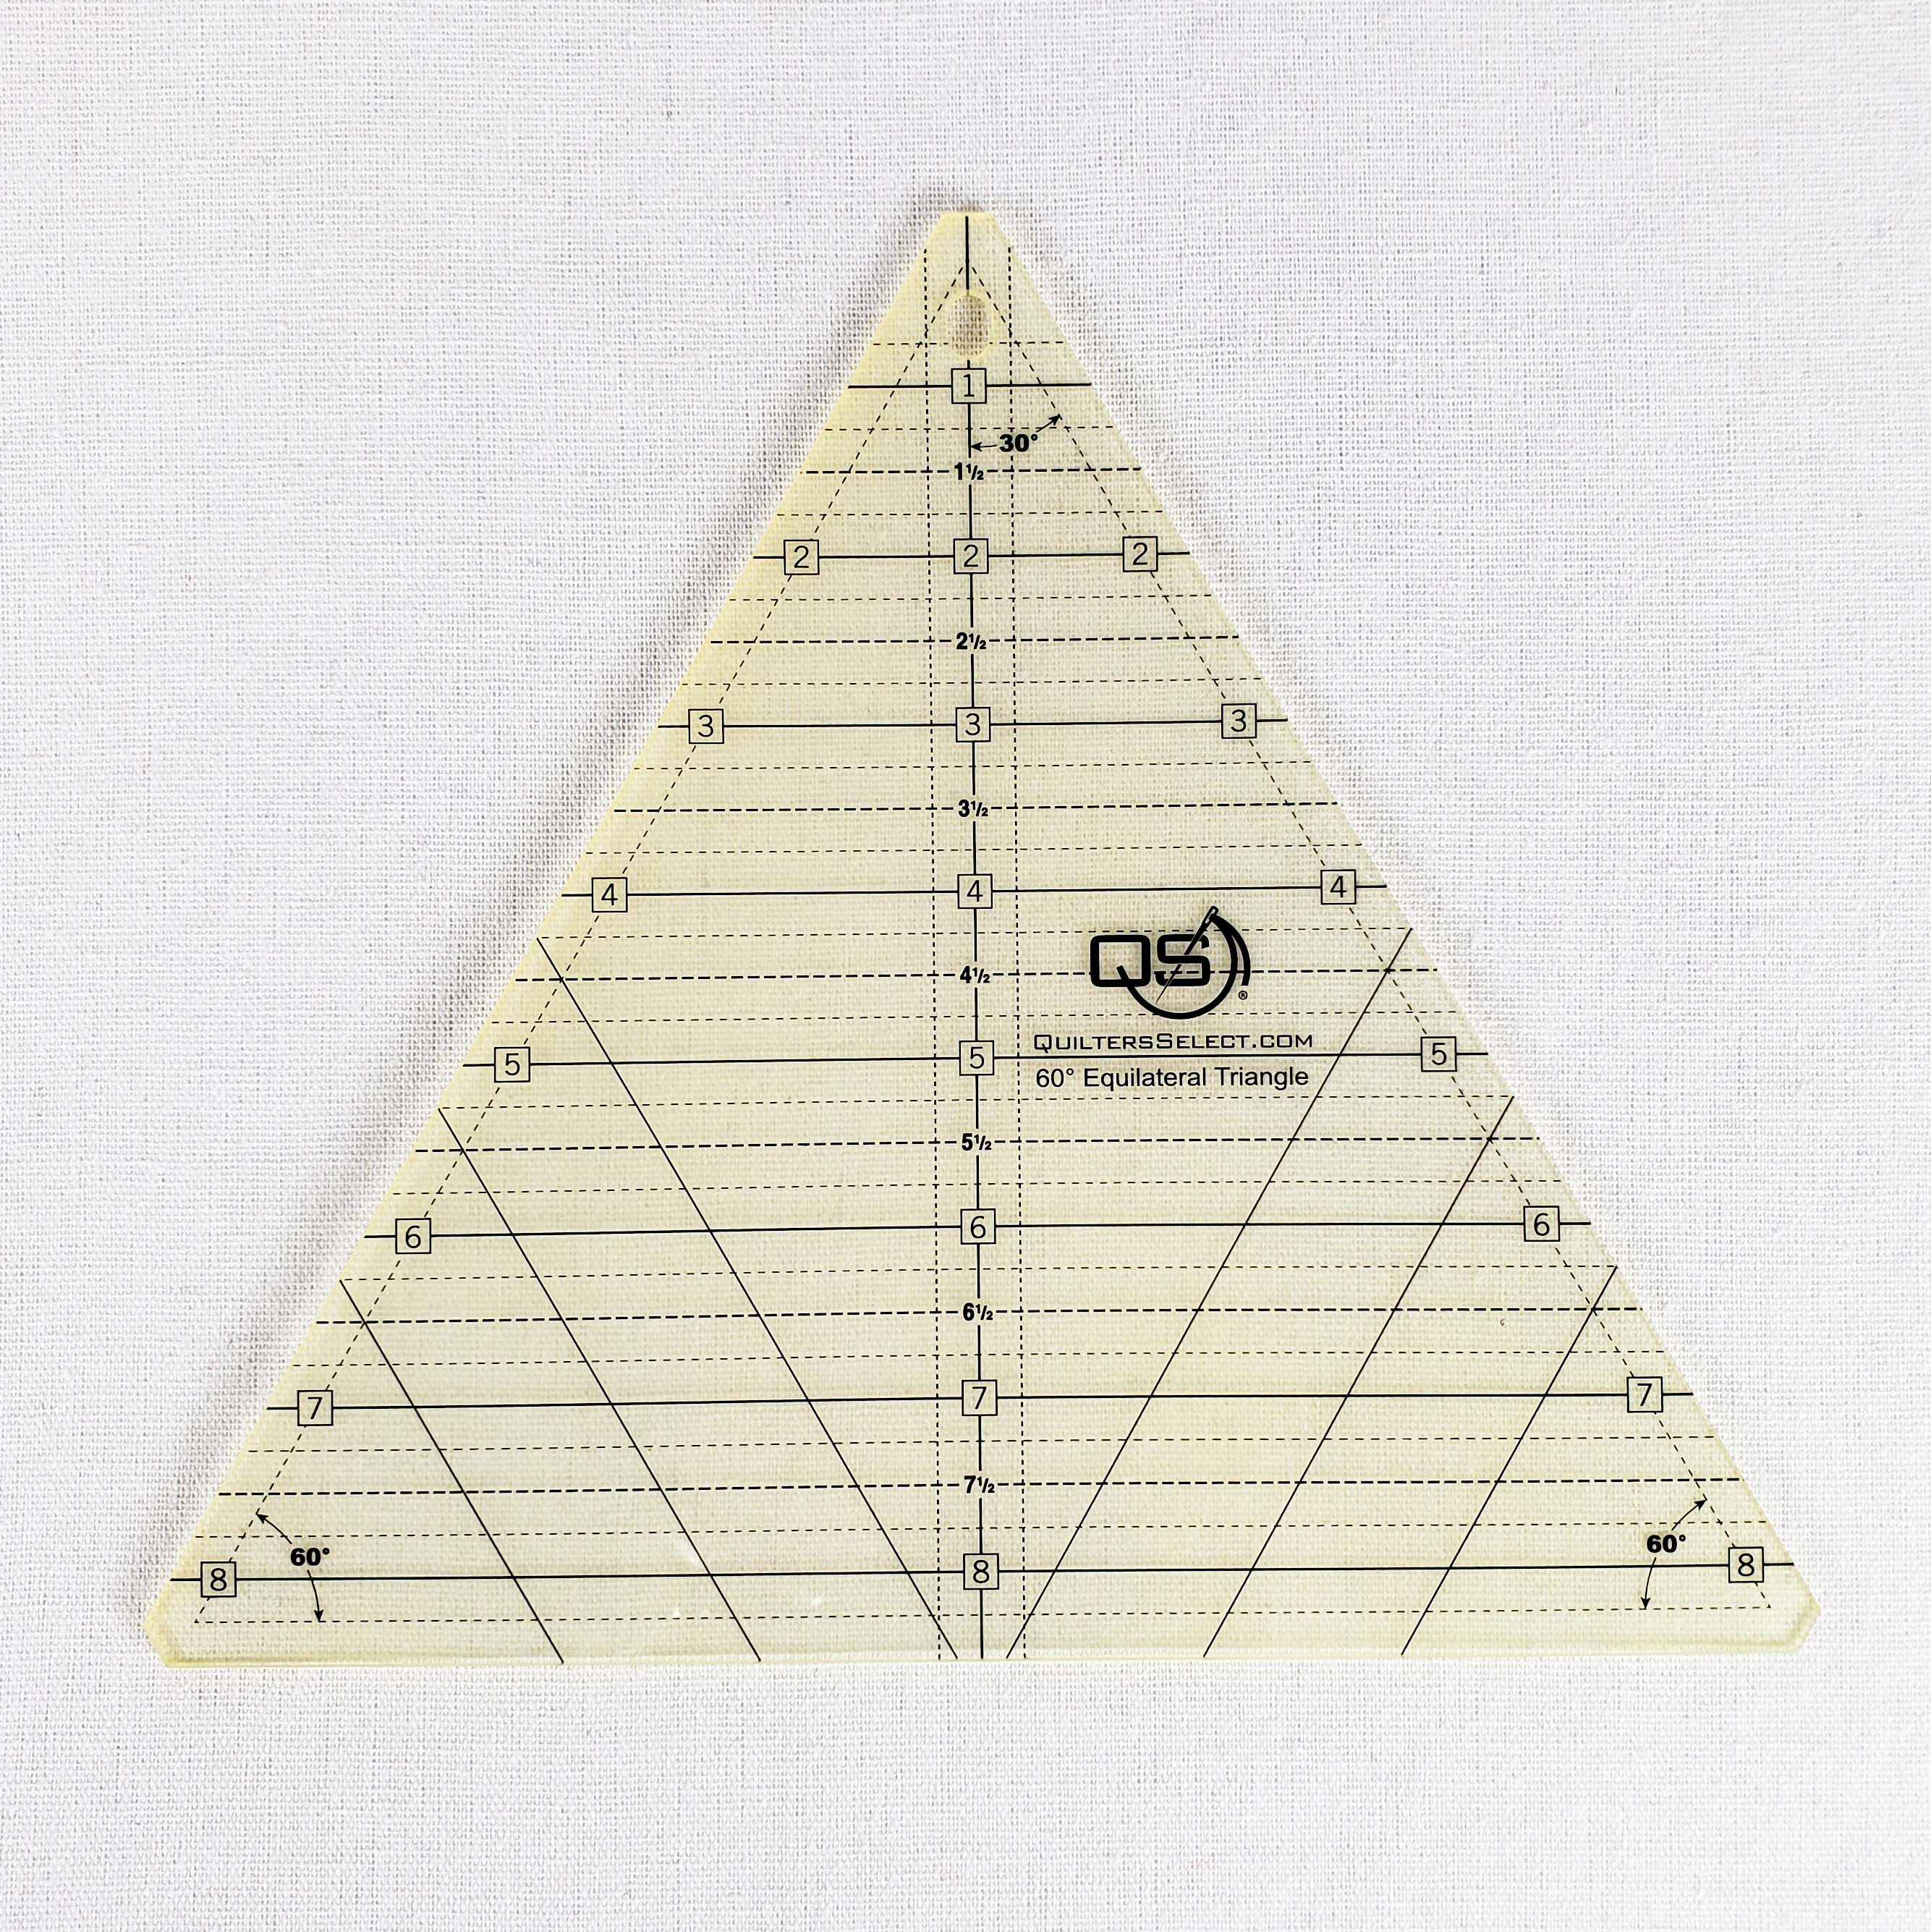 QS 60 Degree Triangle Ruler – Mad B's quilt and sew